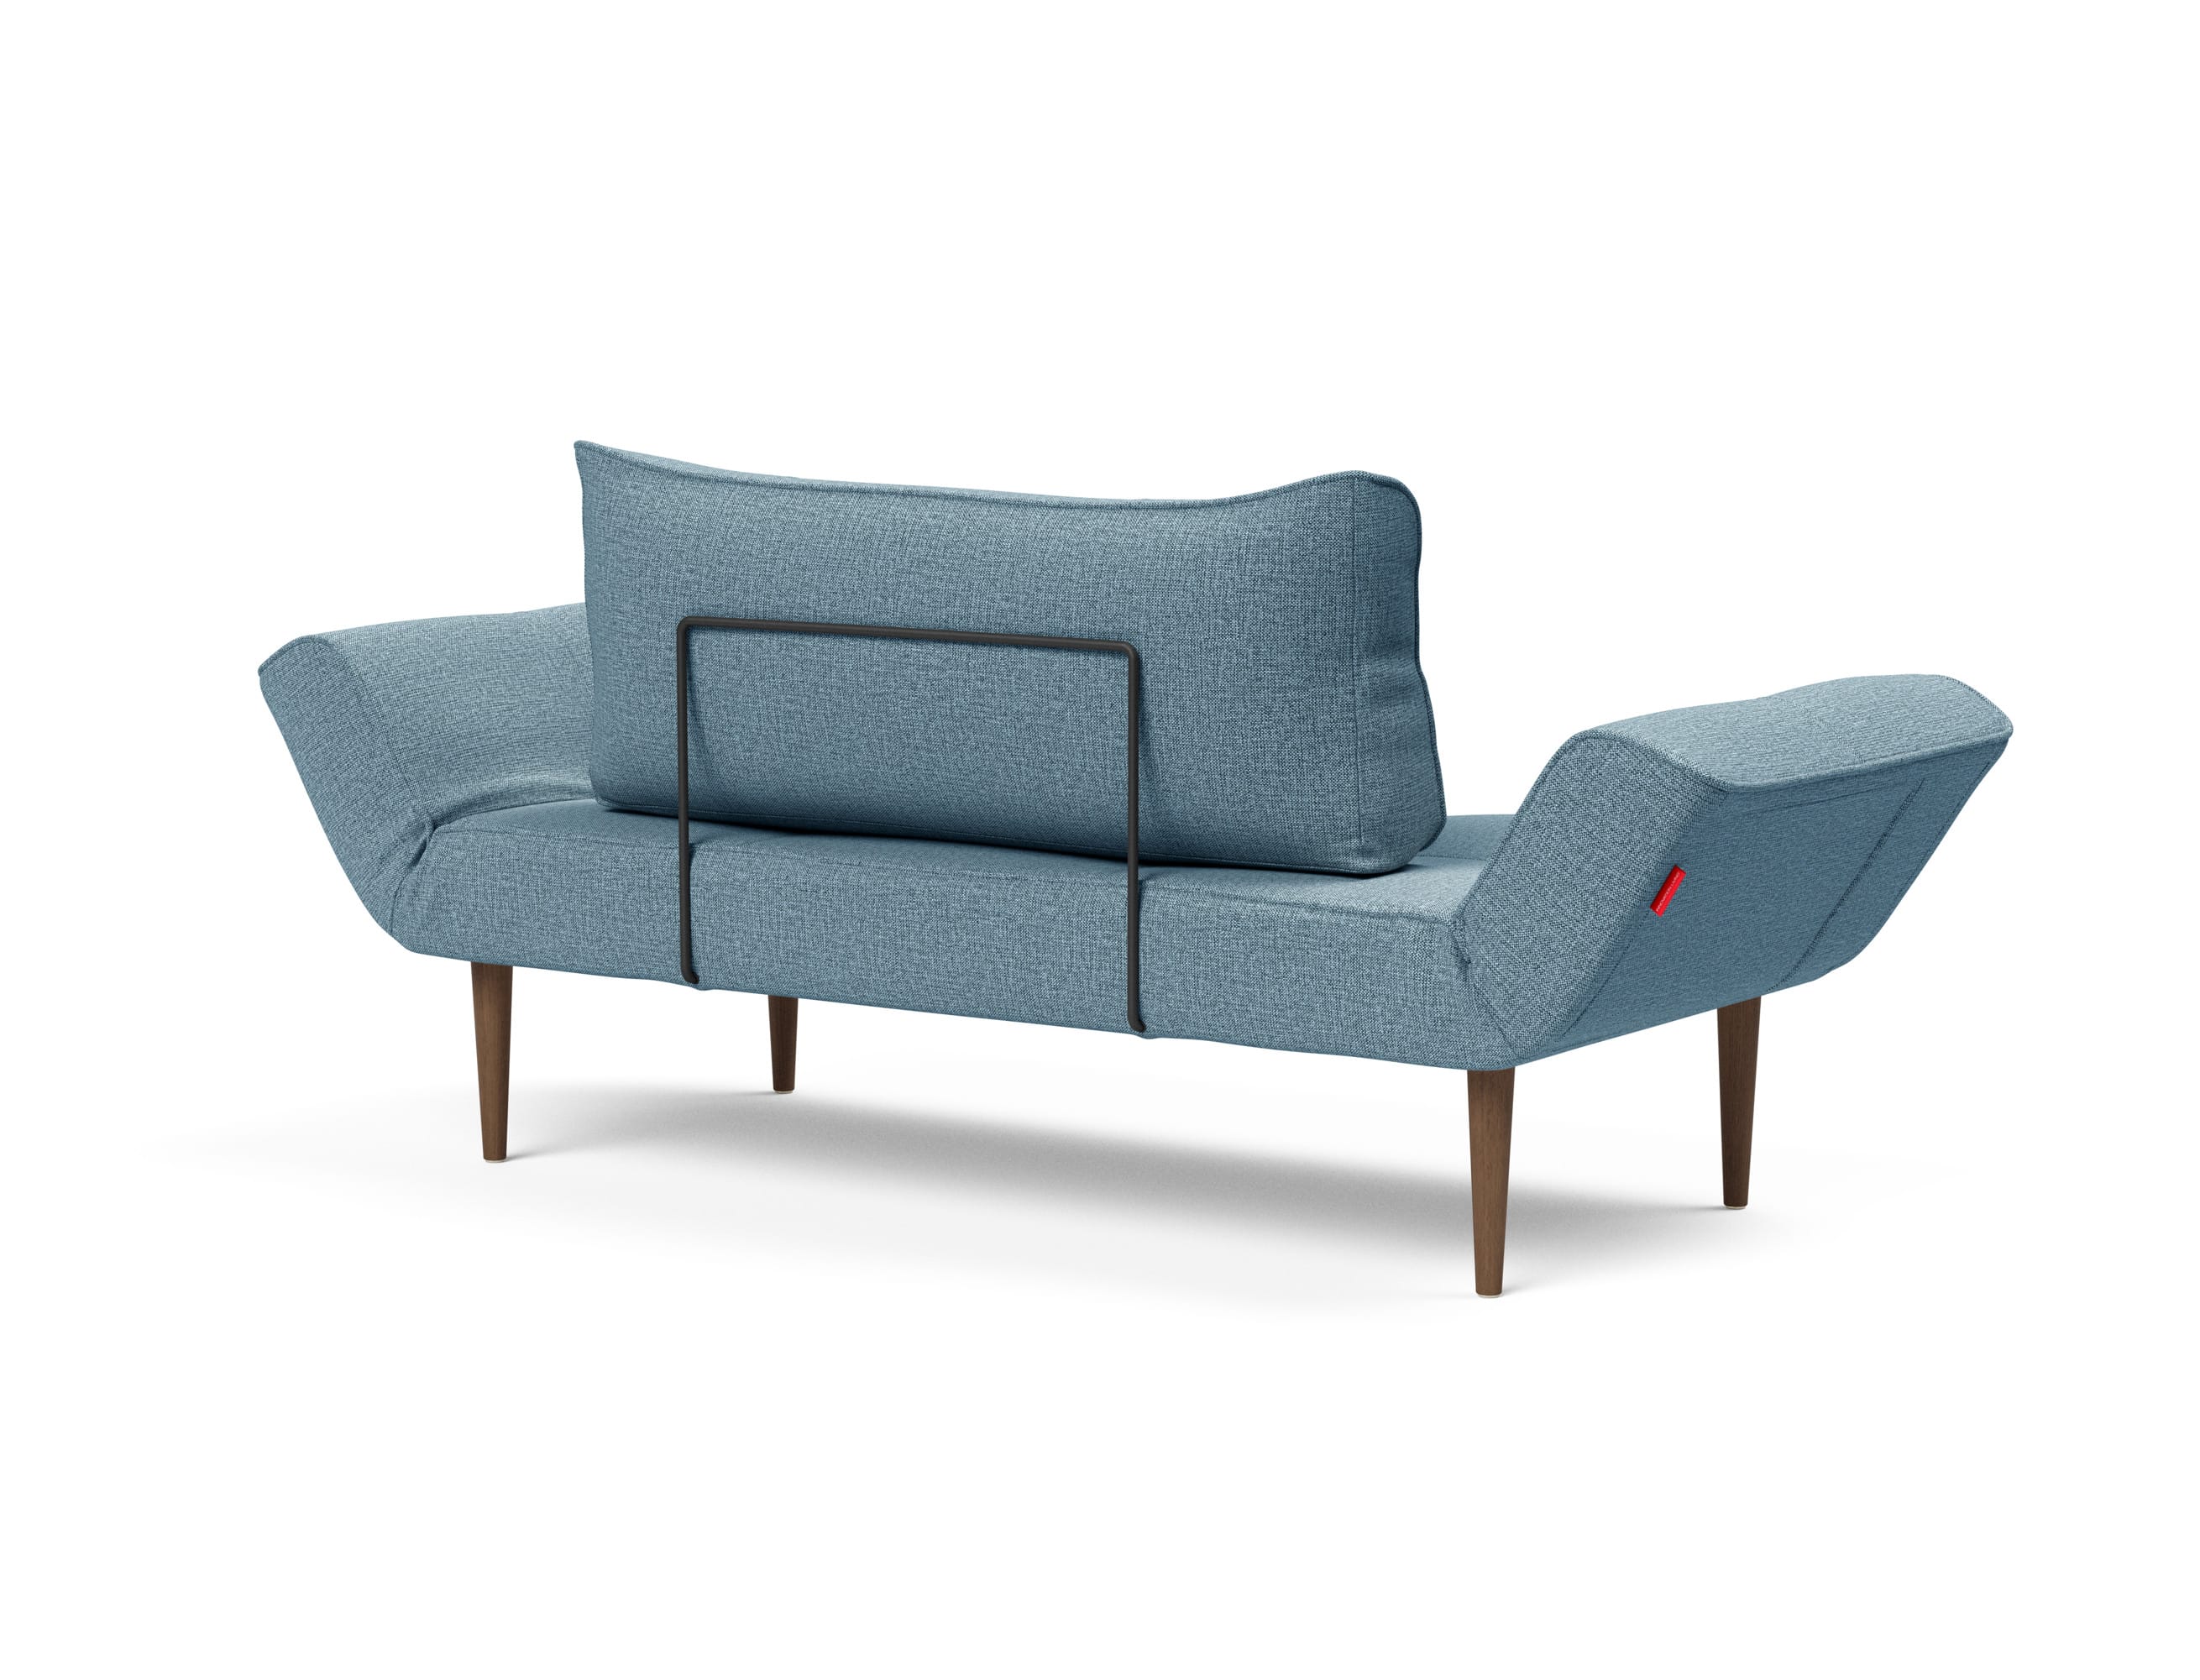 Zeal Deluxe Dance Sofa Mixed Daybed Light Bed by Innovation Blue